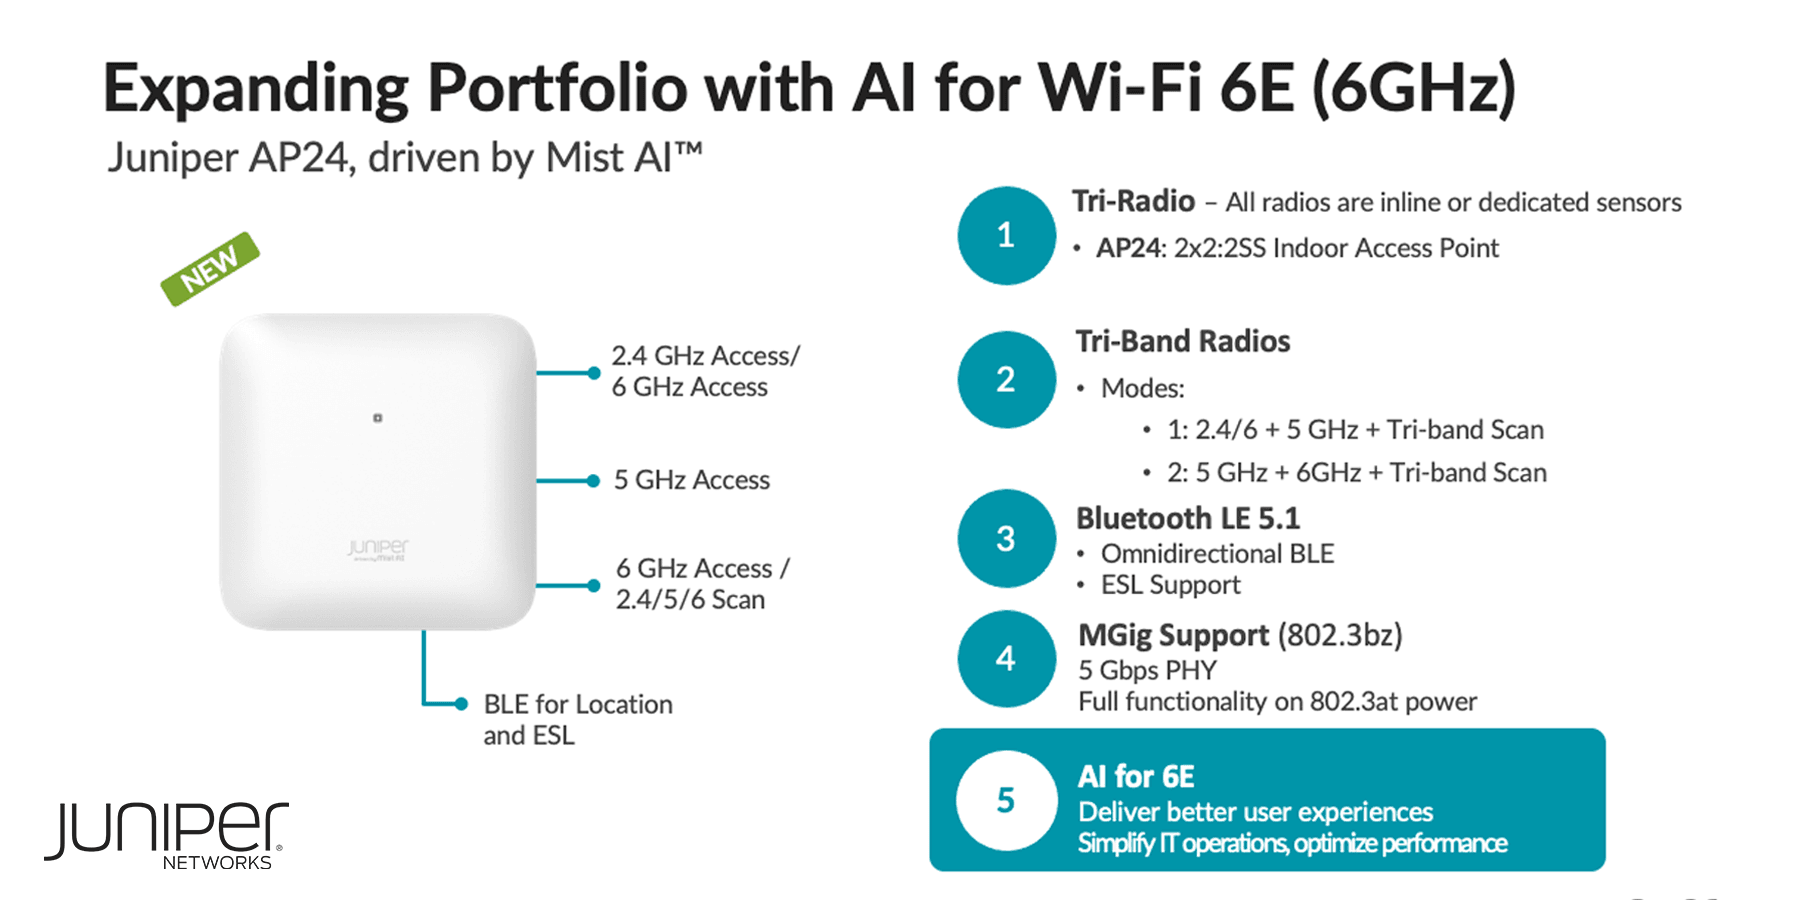 Image of Juniper AP24, driven by Mist AI™ outlining 5 key features for Wi-Fi6E